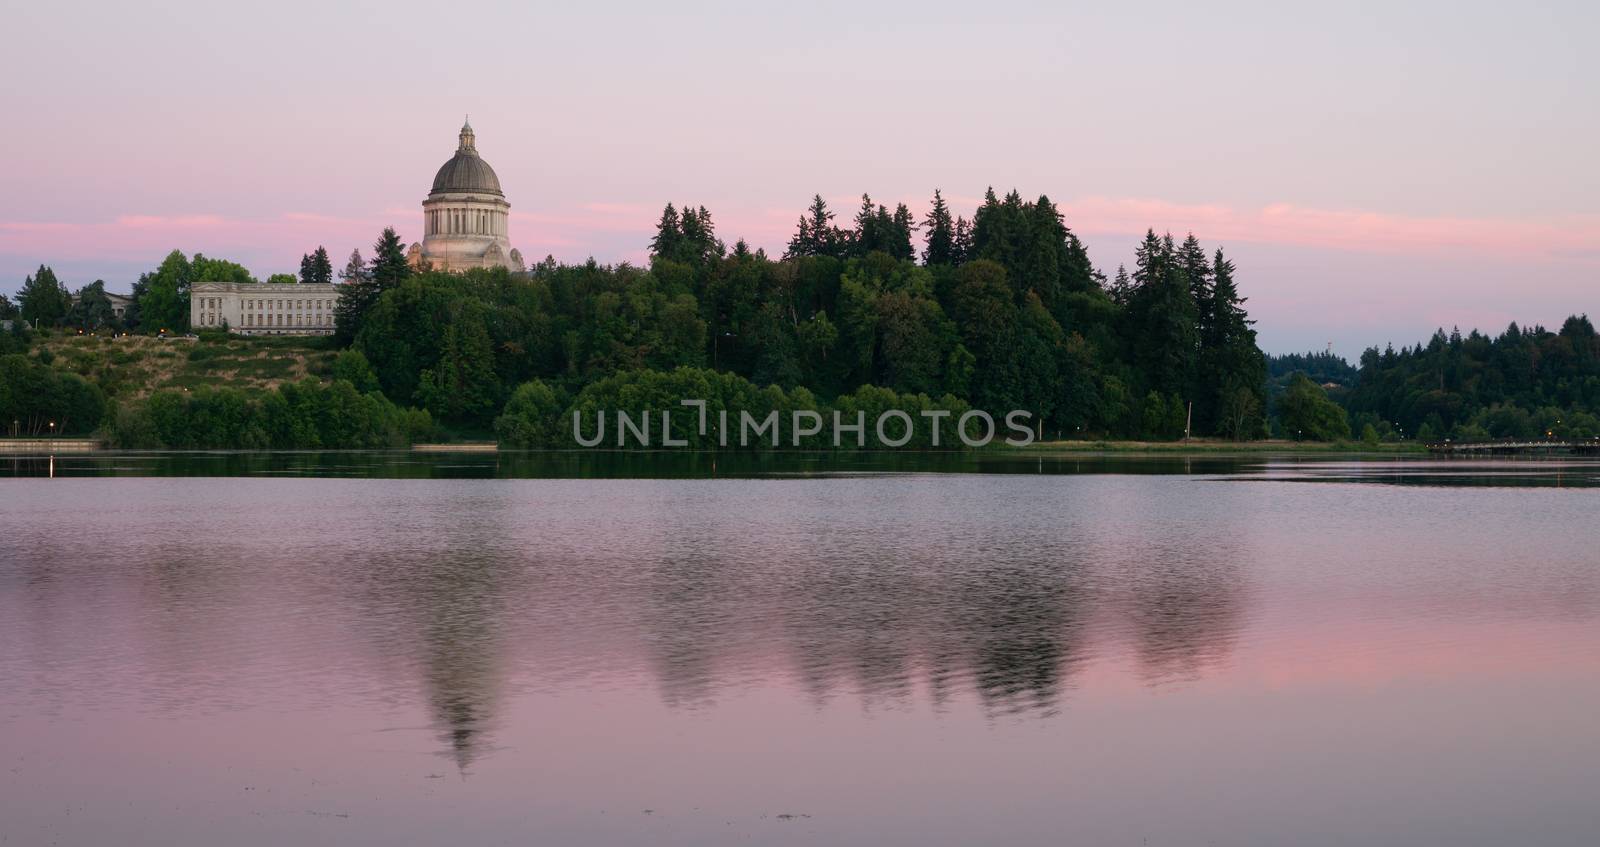 The state capital reflects in the lake of the same name at dusk in Olympia, Wa